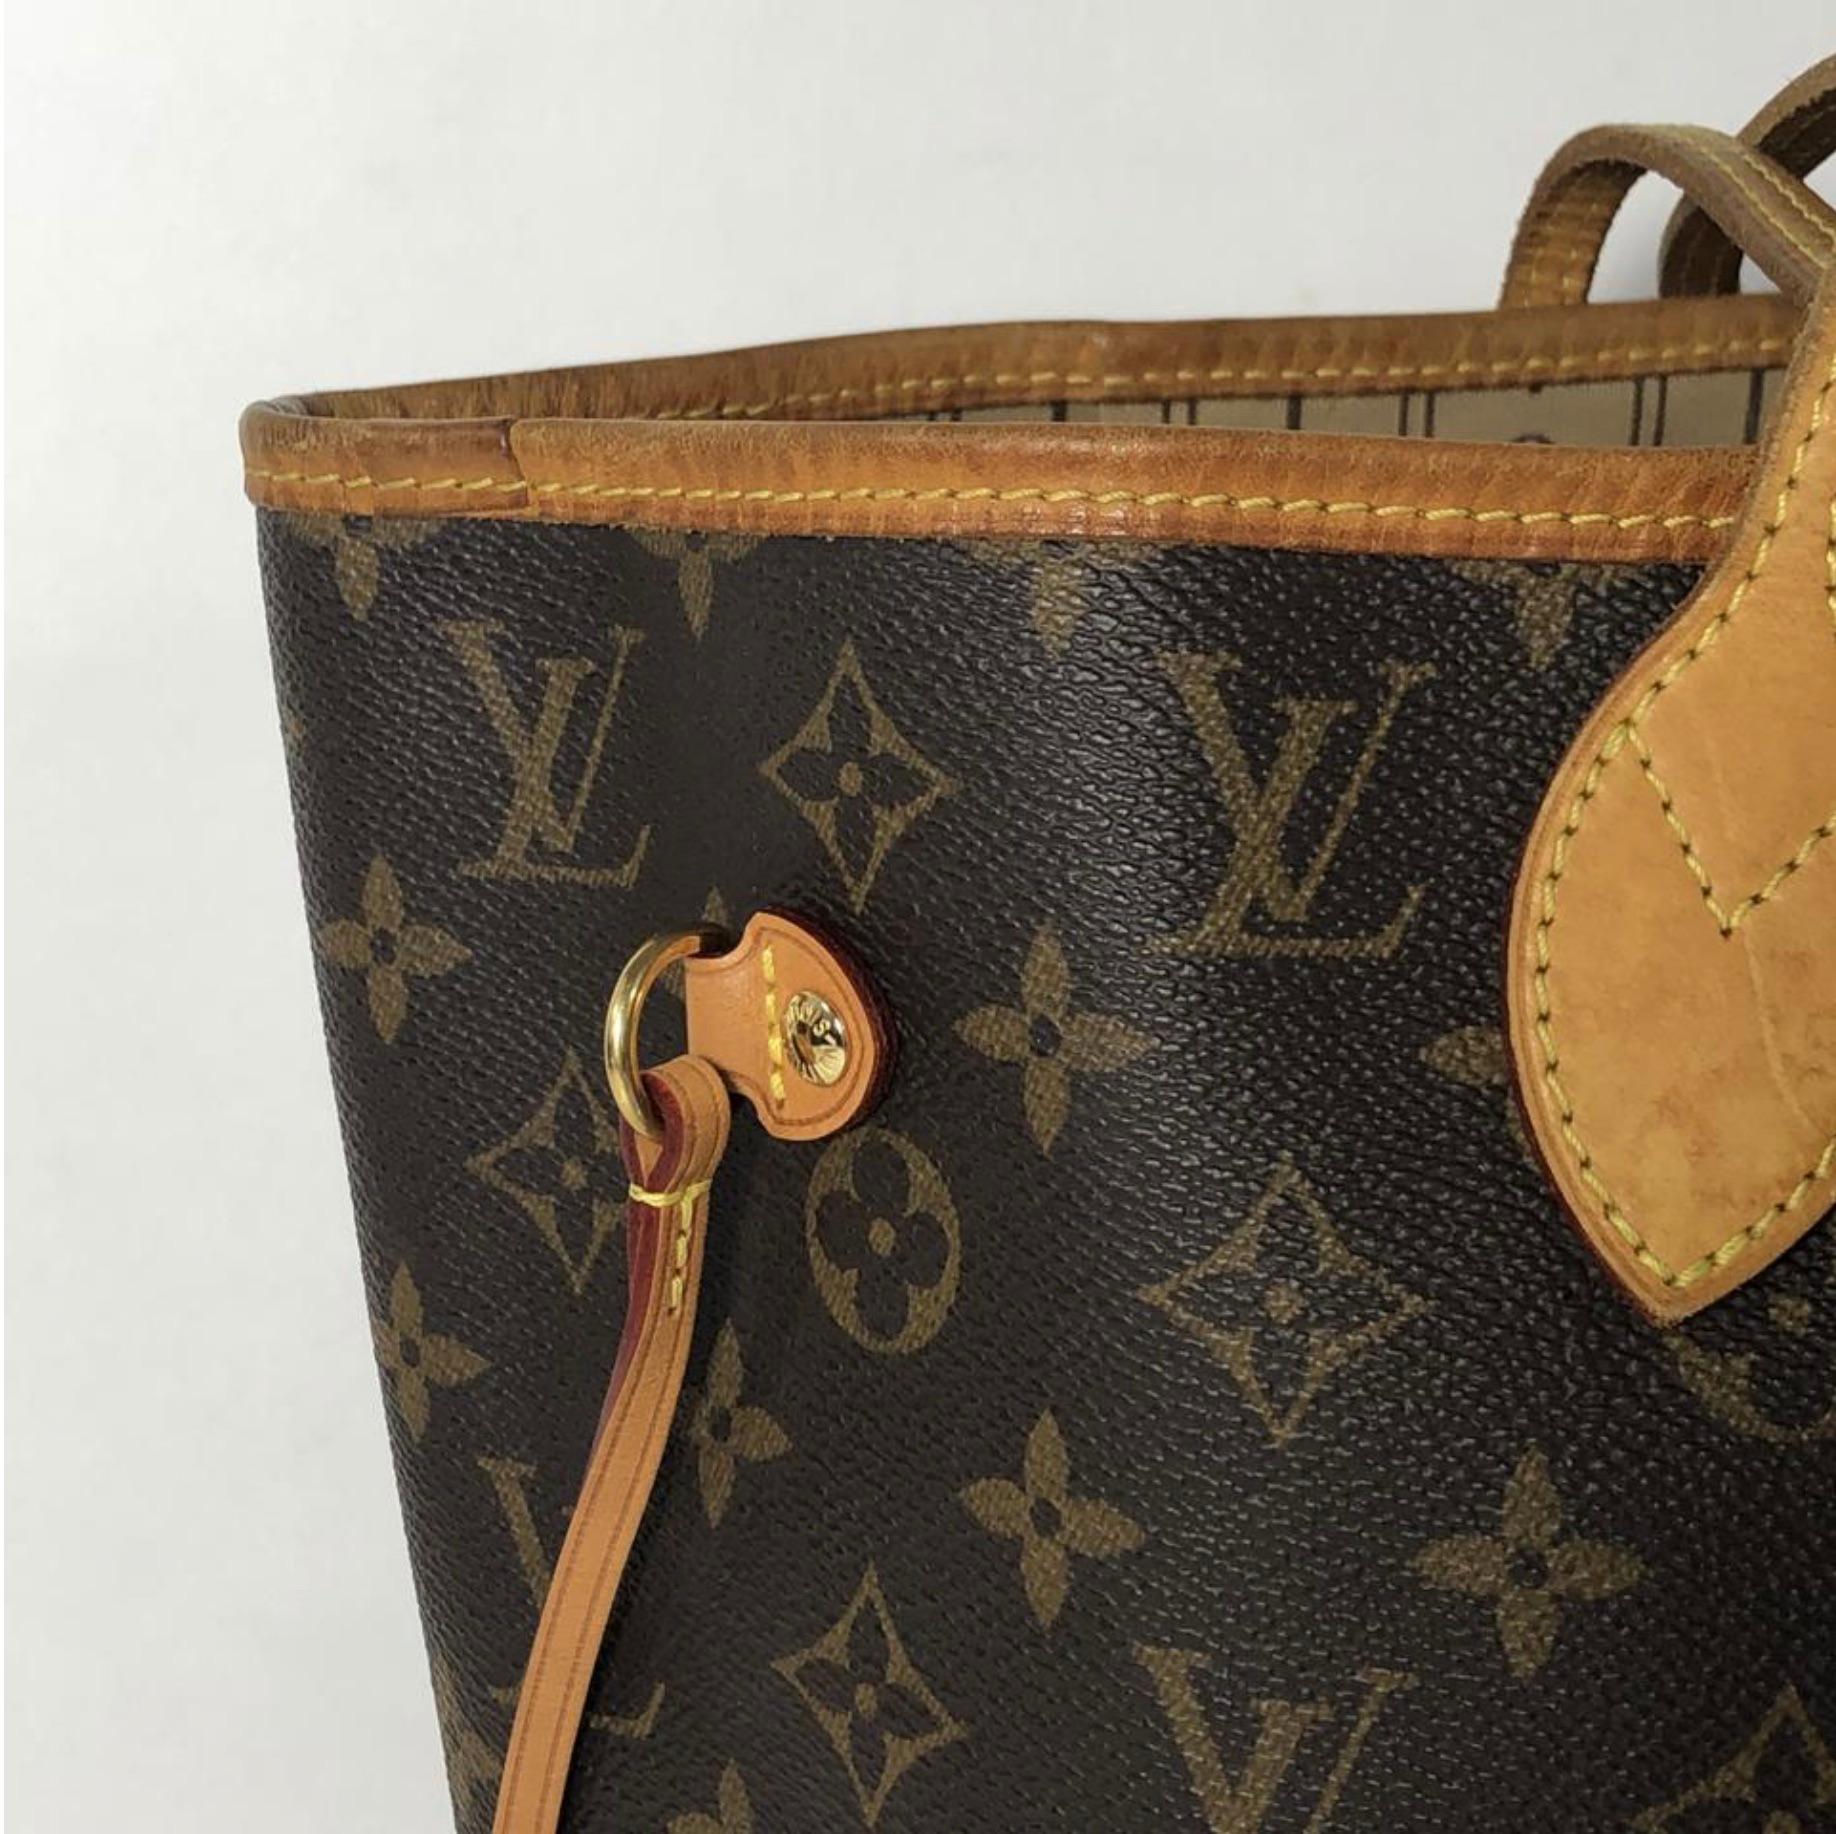  Louis Vuitton Monogram Neverfull MM Tote Shoulder Handbag In Good Condition For Sale In Saint Charles, IL